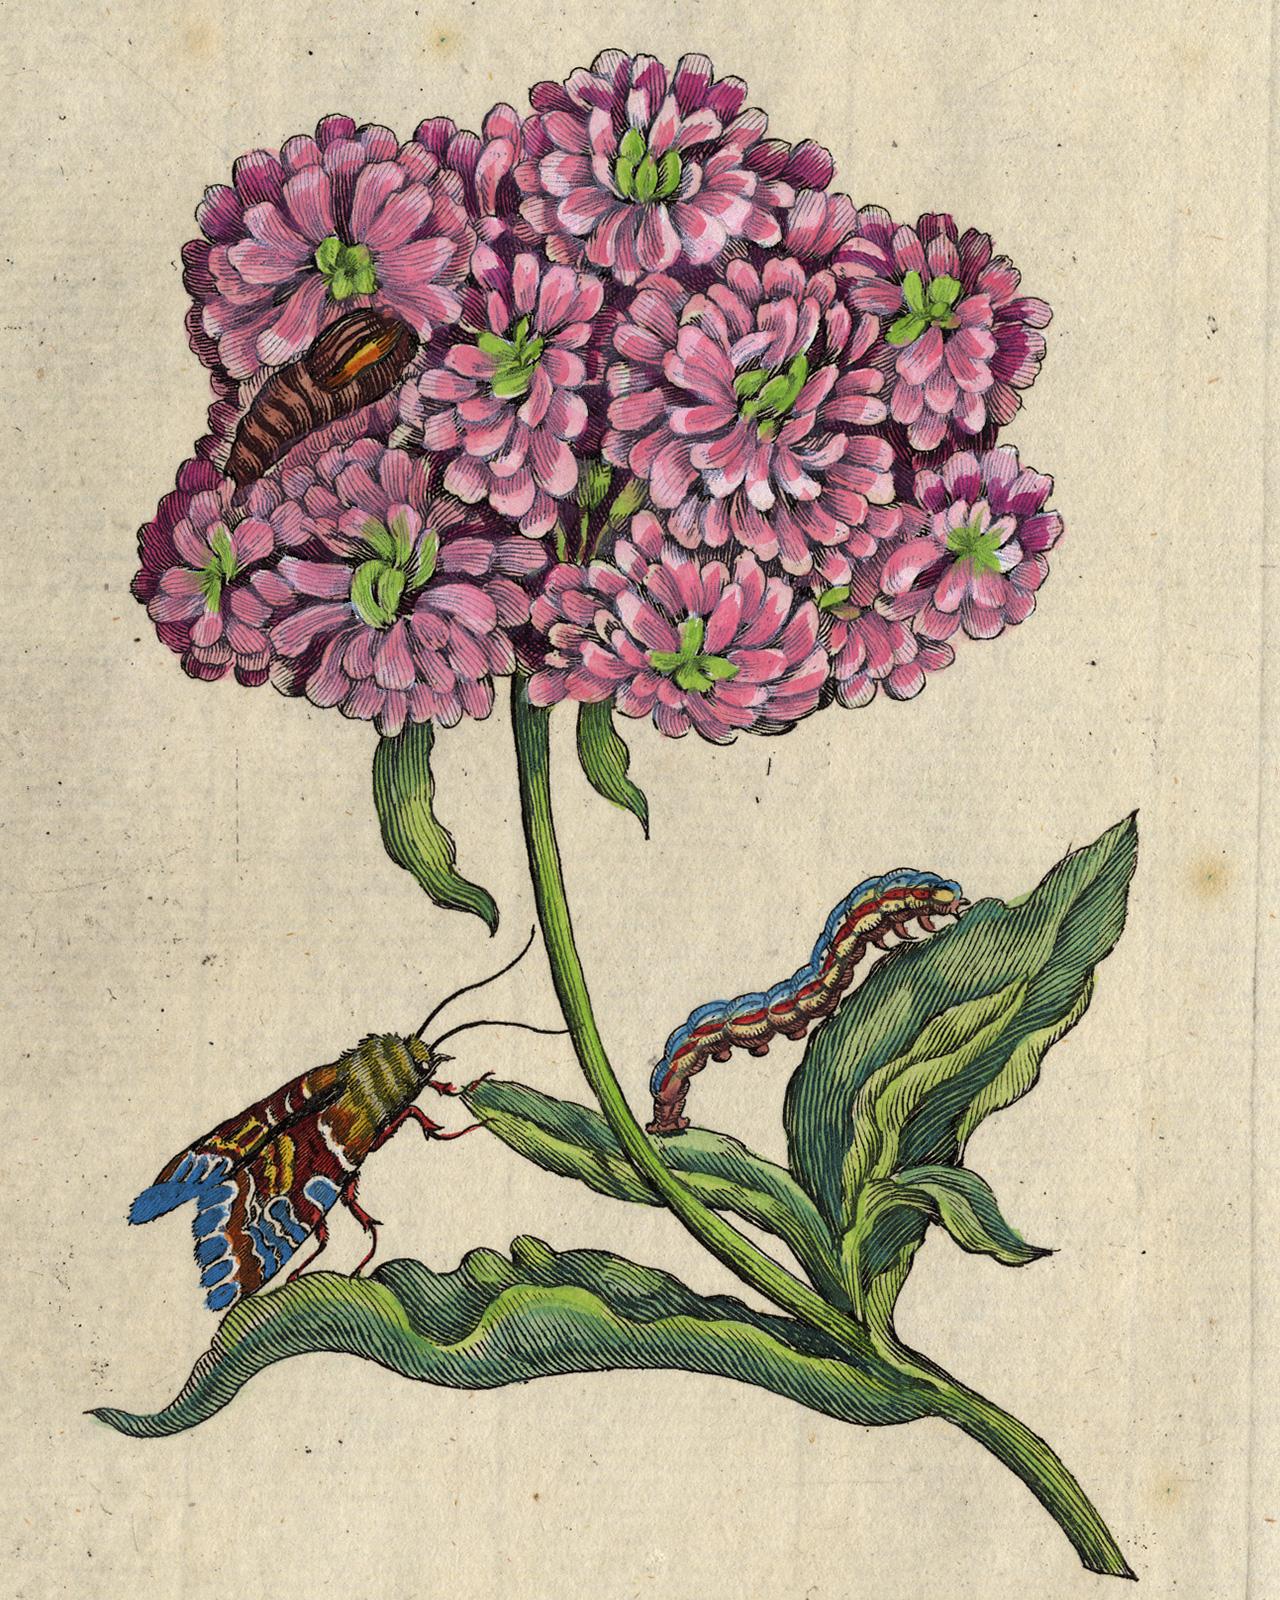 Jerusalem Cross with insects by Merian - Handcoloured engraving - 18th century - Print by Maria Sybilla Merian